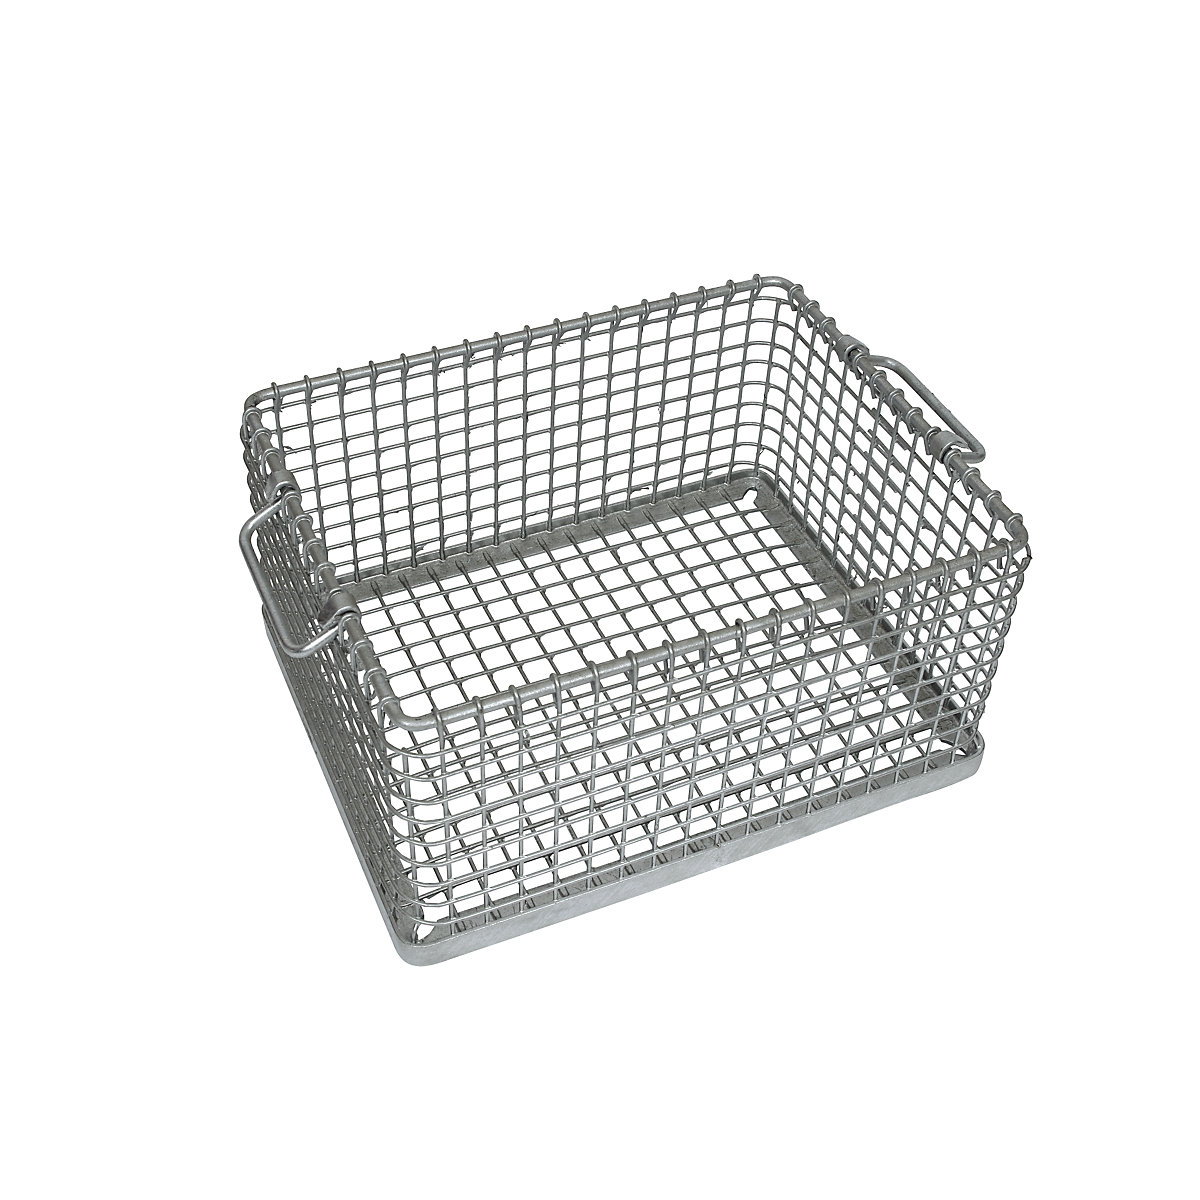 Stacking basket for heavy items